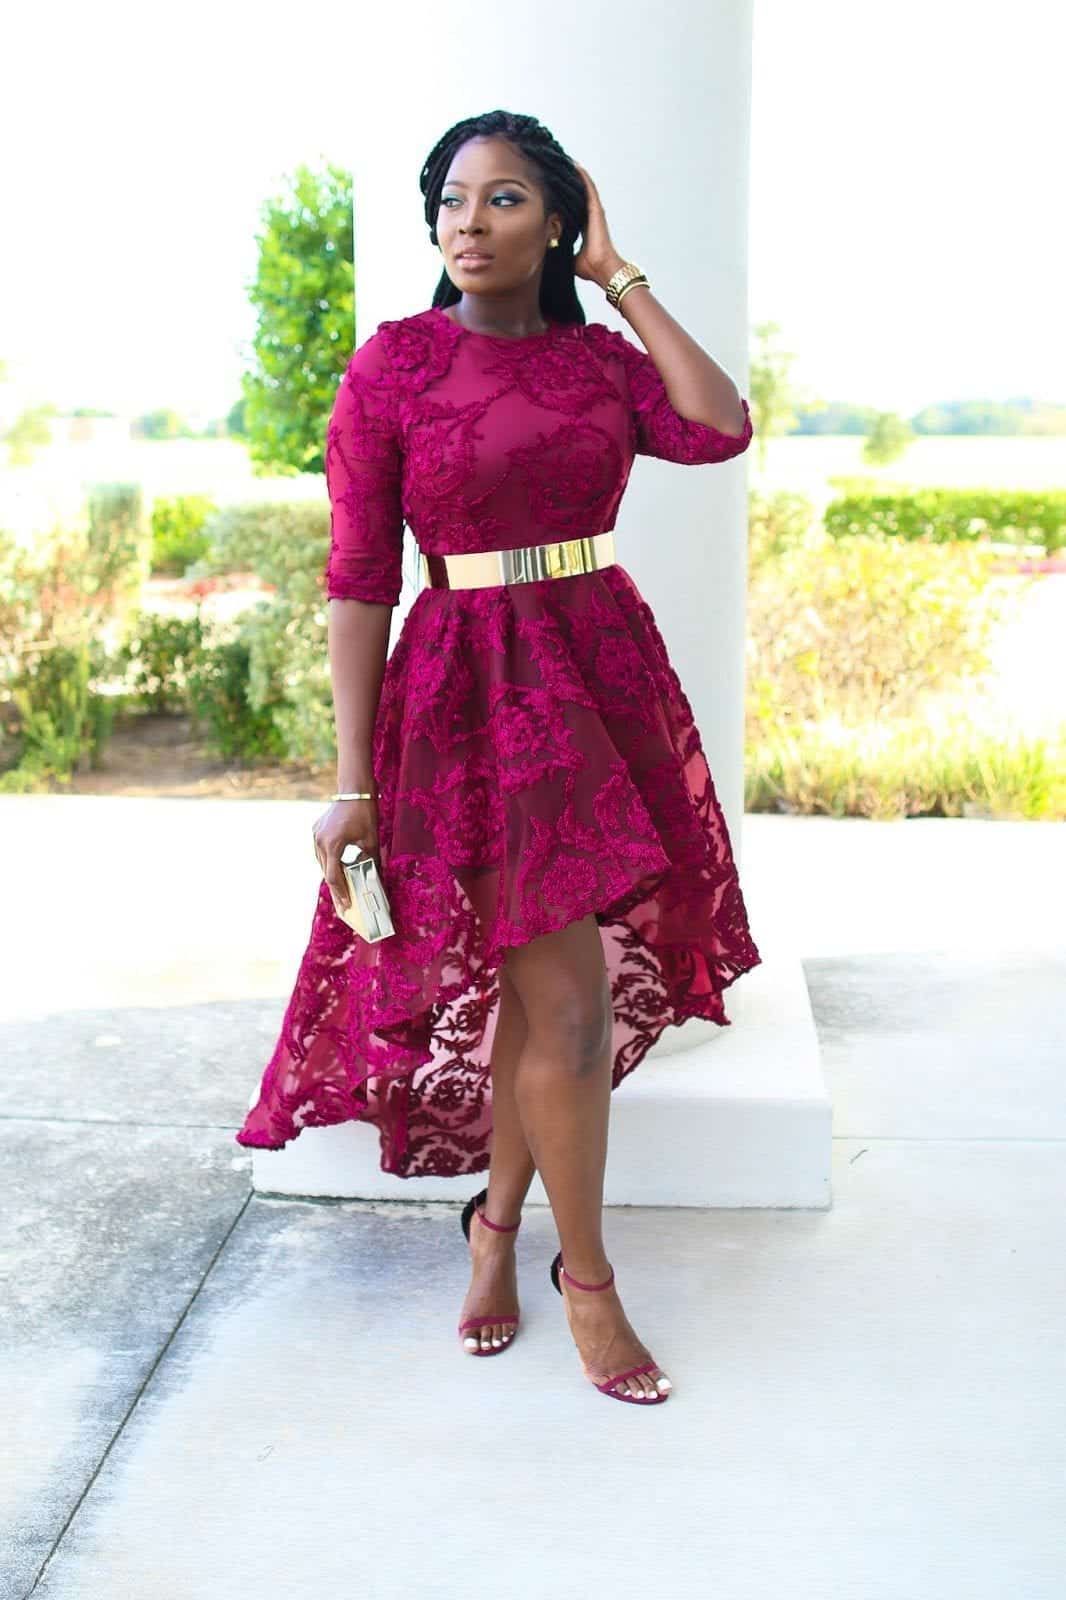 Modern African Dresses 18 Latest African Fashion Styles 2019